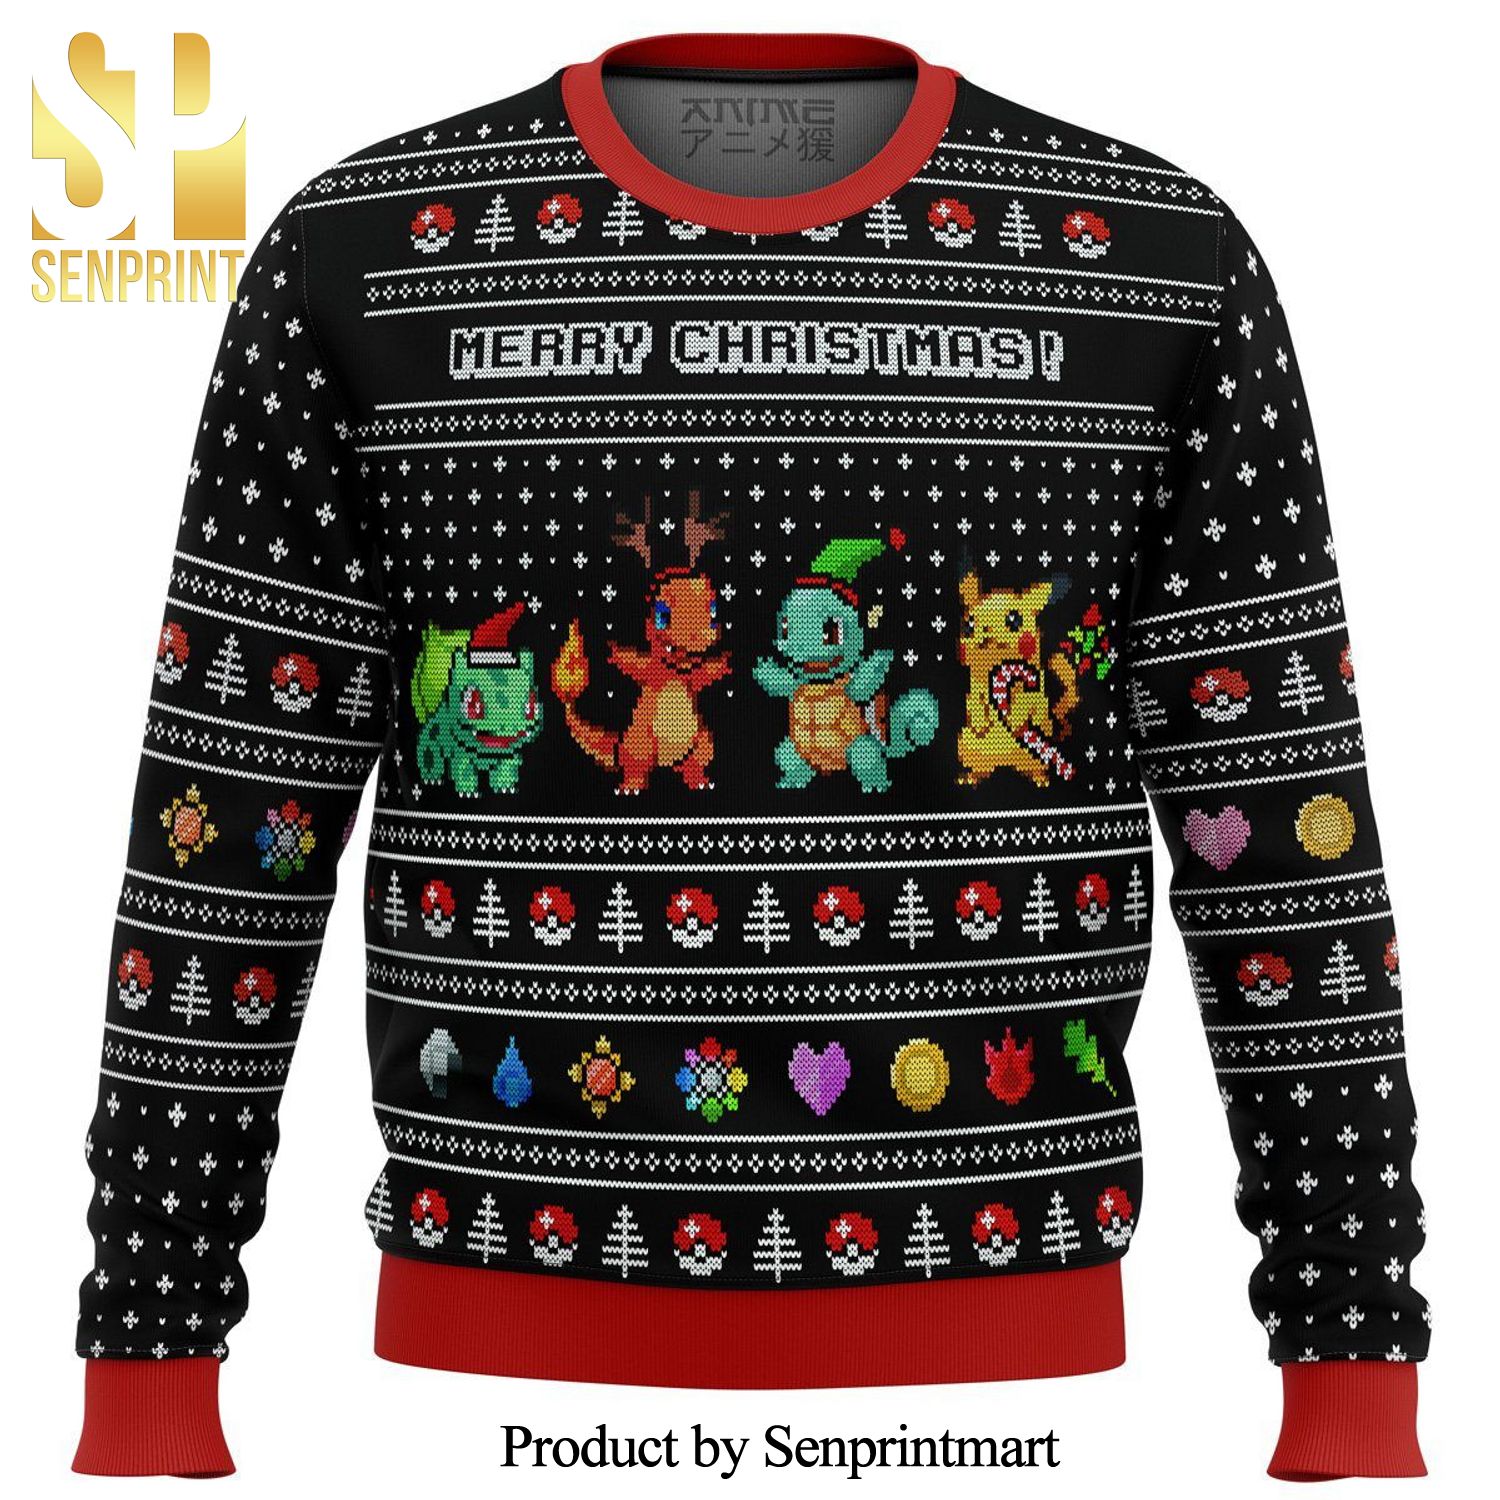 Kanto Starters Pokemon Knitted Ugly Christmas Sweater